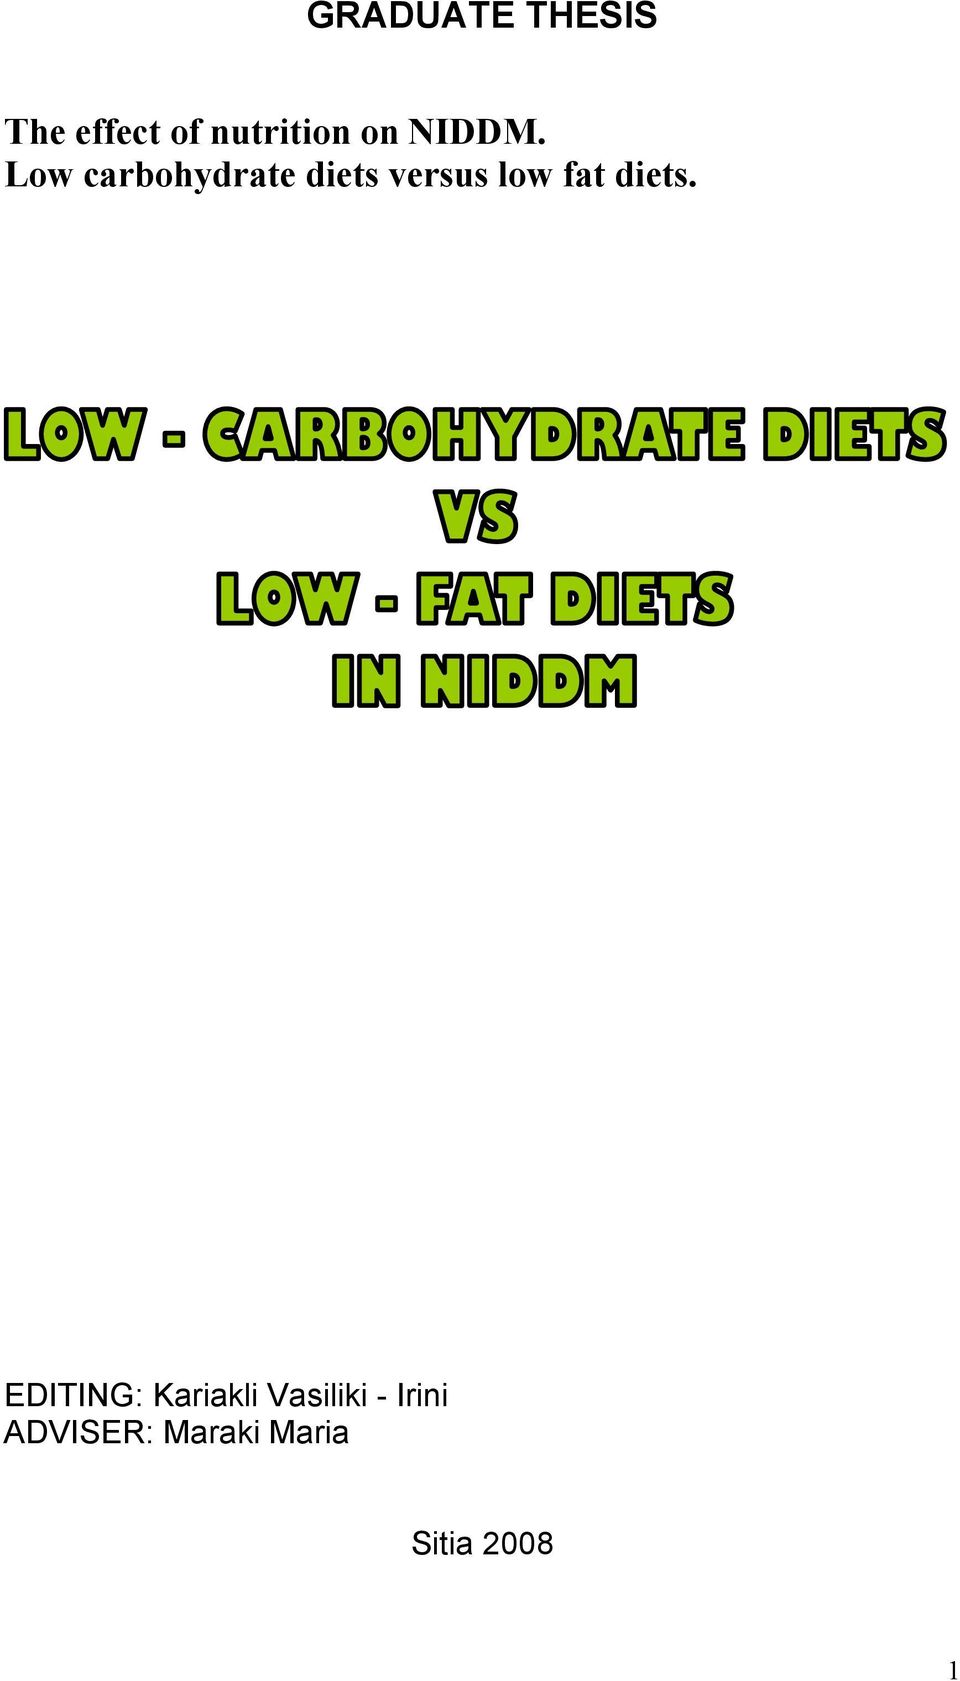 Low carbohydrate diets versus low fat